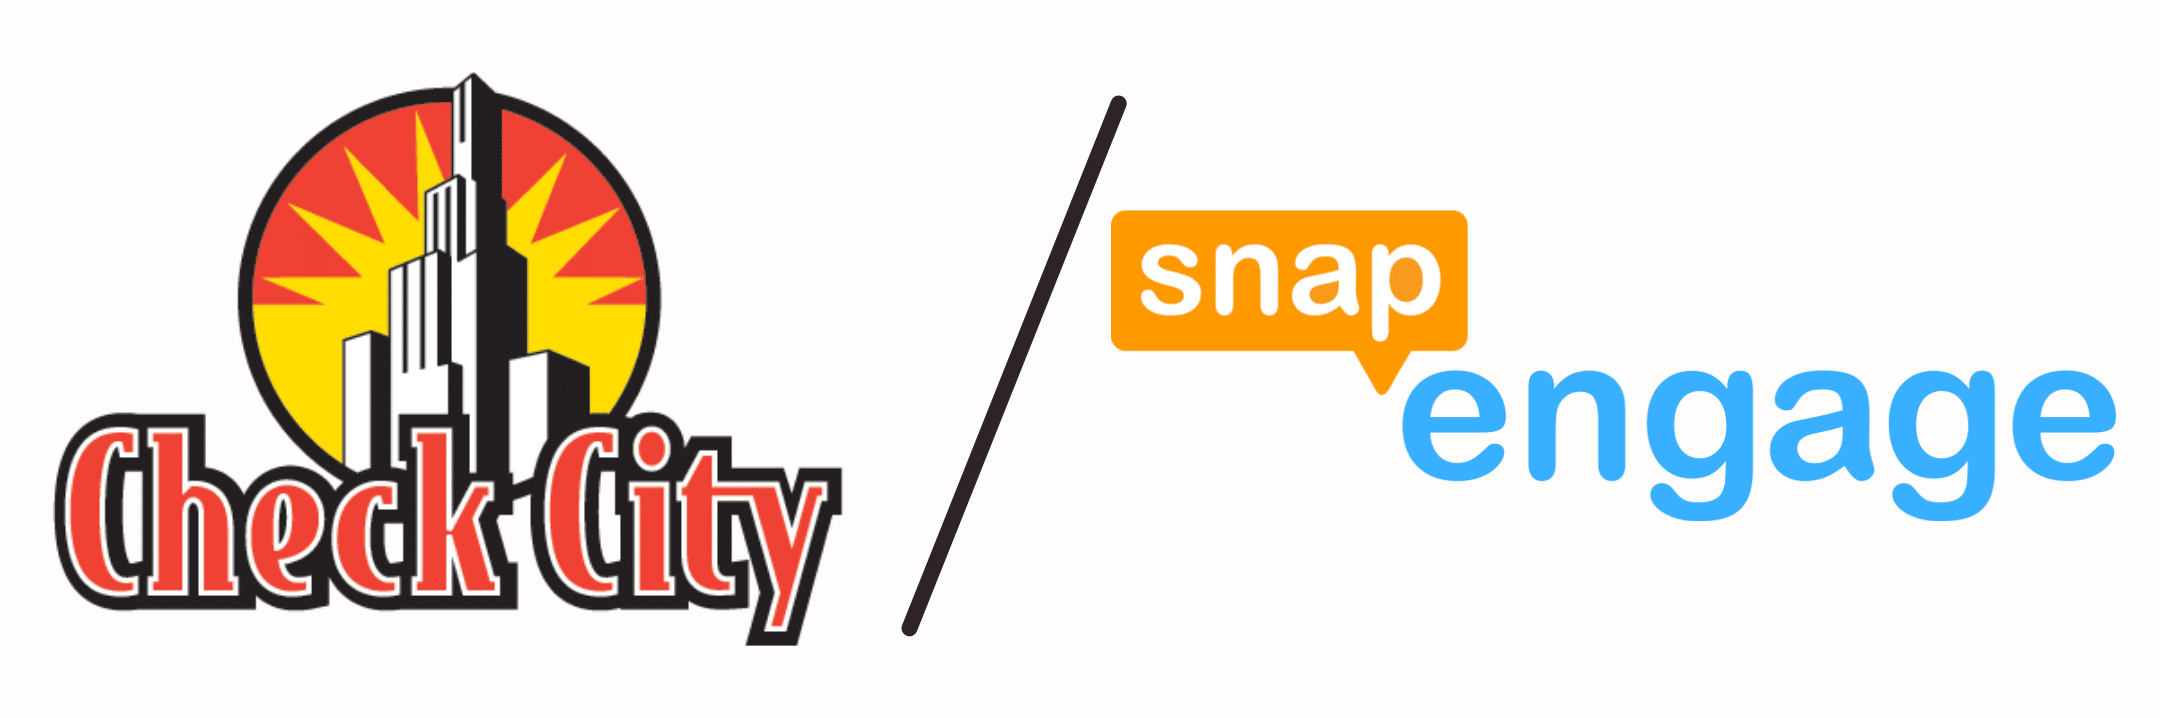 Check City and SnapEngage